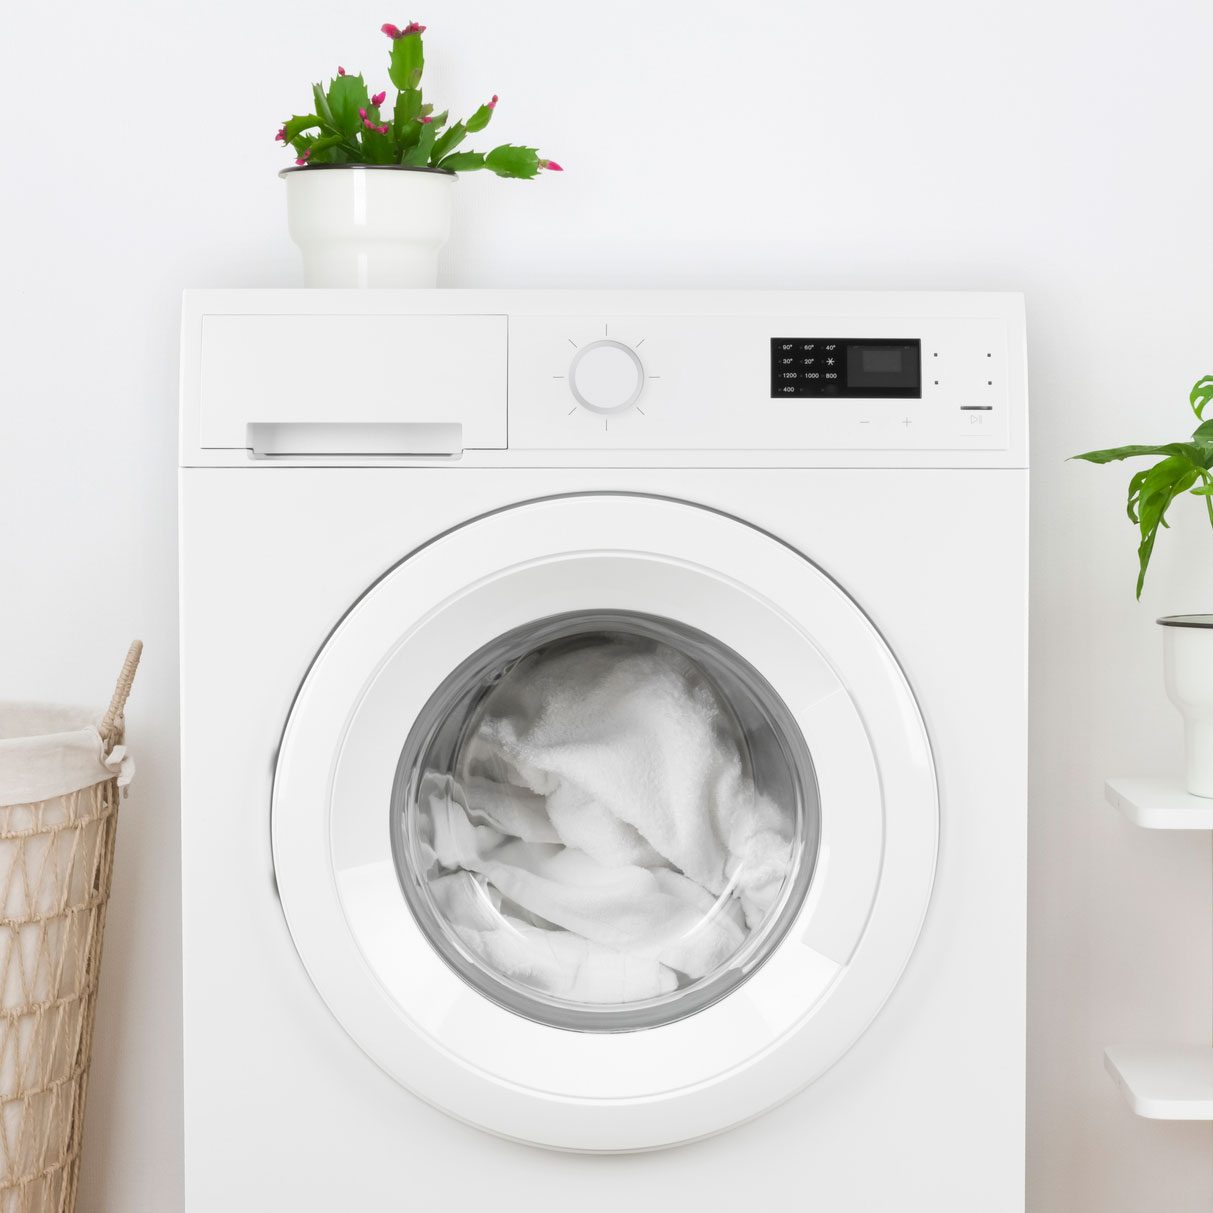  How to Use Baking Soda and Vinegar in Your Laundry